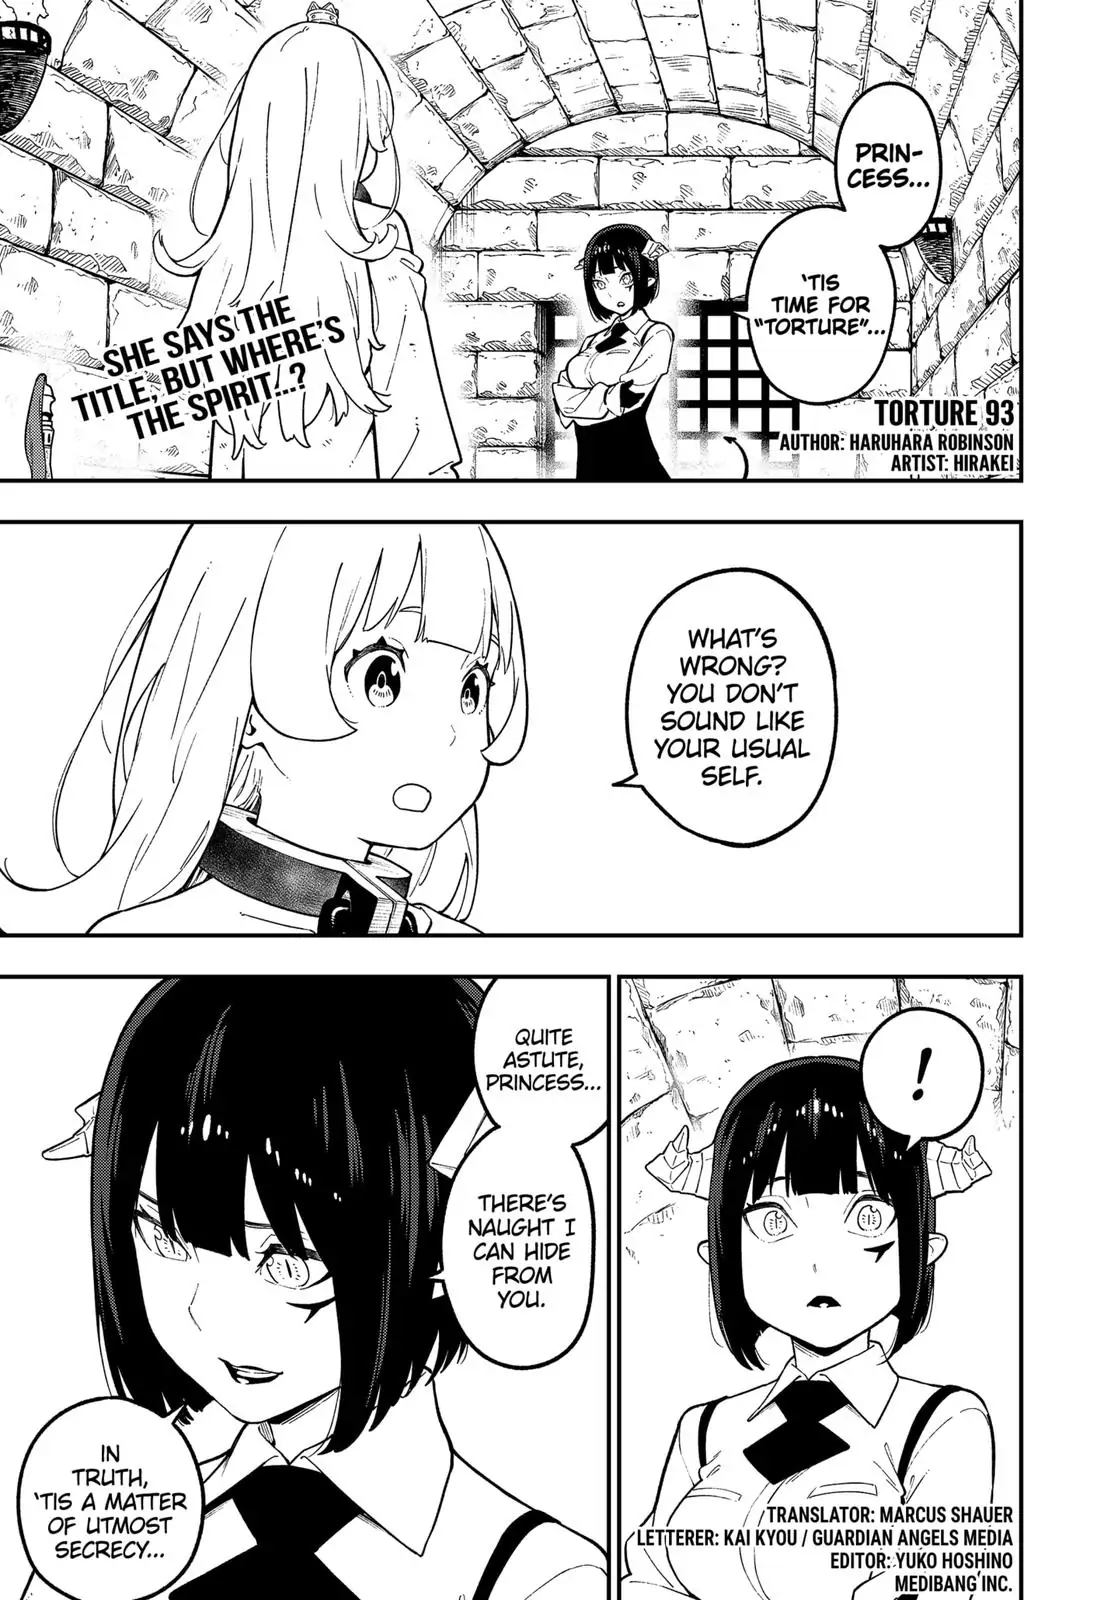 It's Time for "Interrogation", Princess! - chapter 93 - #1